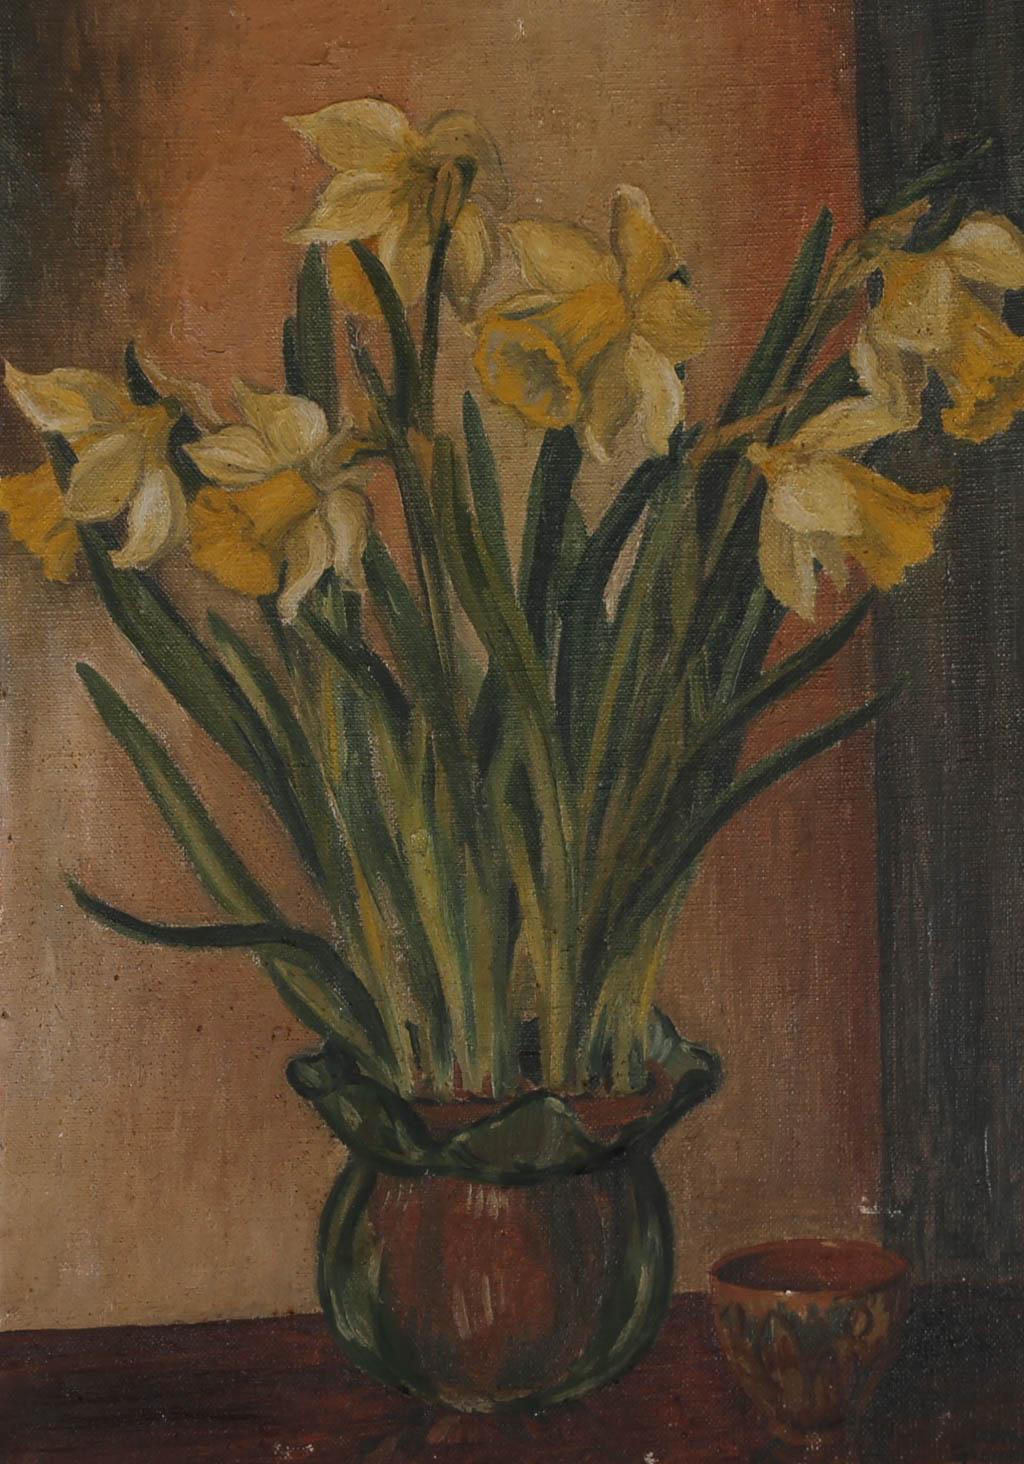 A delightful little oil study of daffodils in a glass vase. Well presented in a thick wood frame. Signed. On canvas board.
